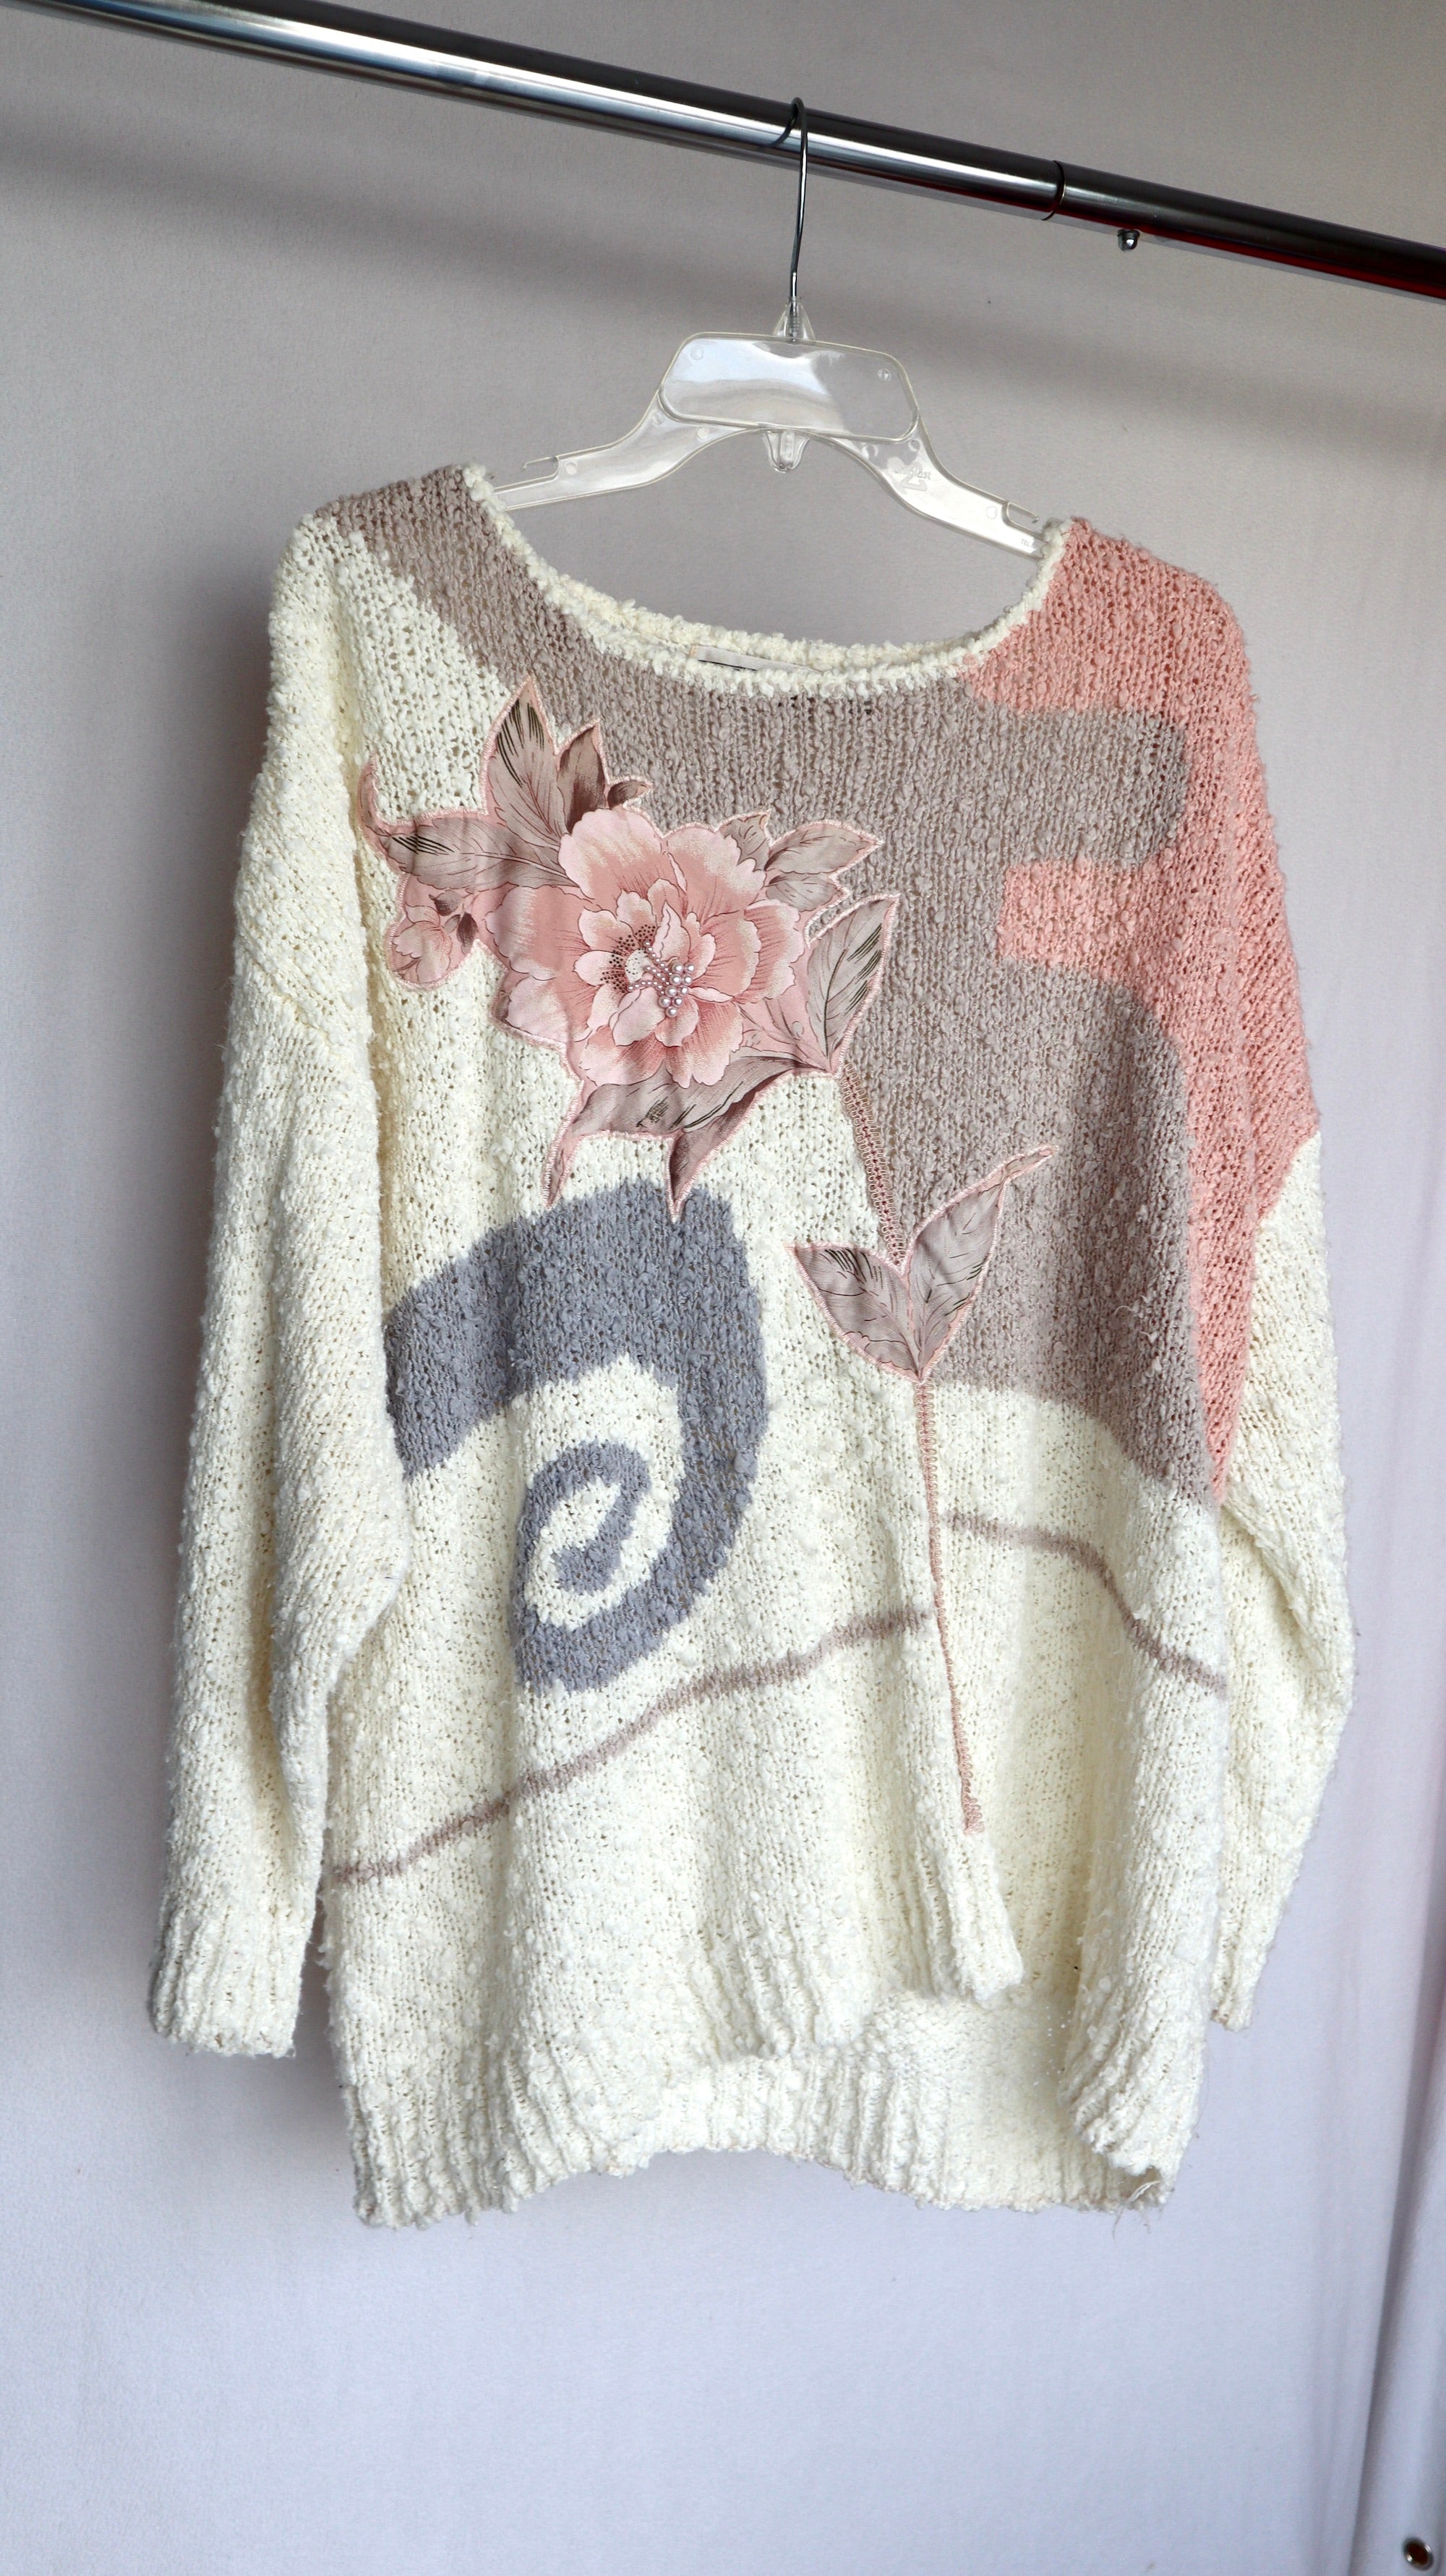 VINTAGE EMBELLISHED ABSTRACT SWEATER